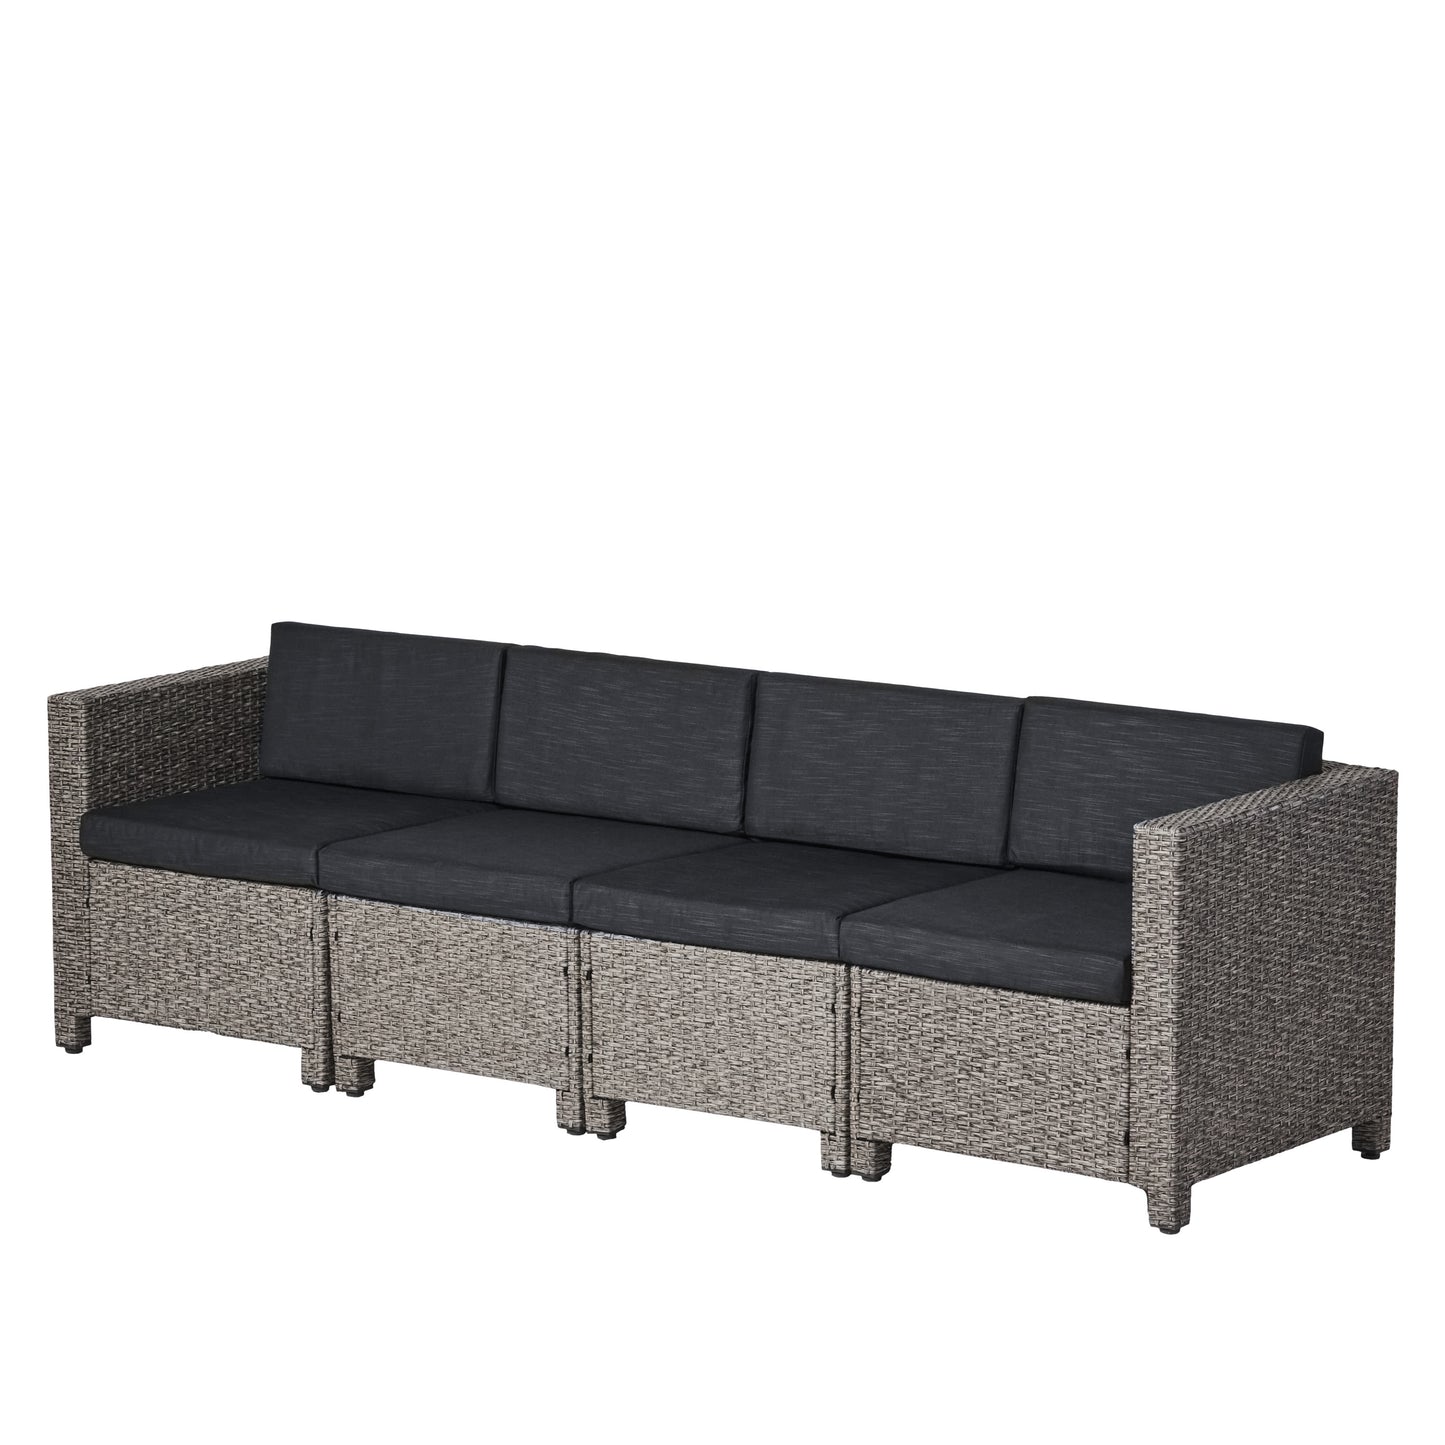 Venice Outdoor Wicker 4 Seater Sectional Sofa with Cushions